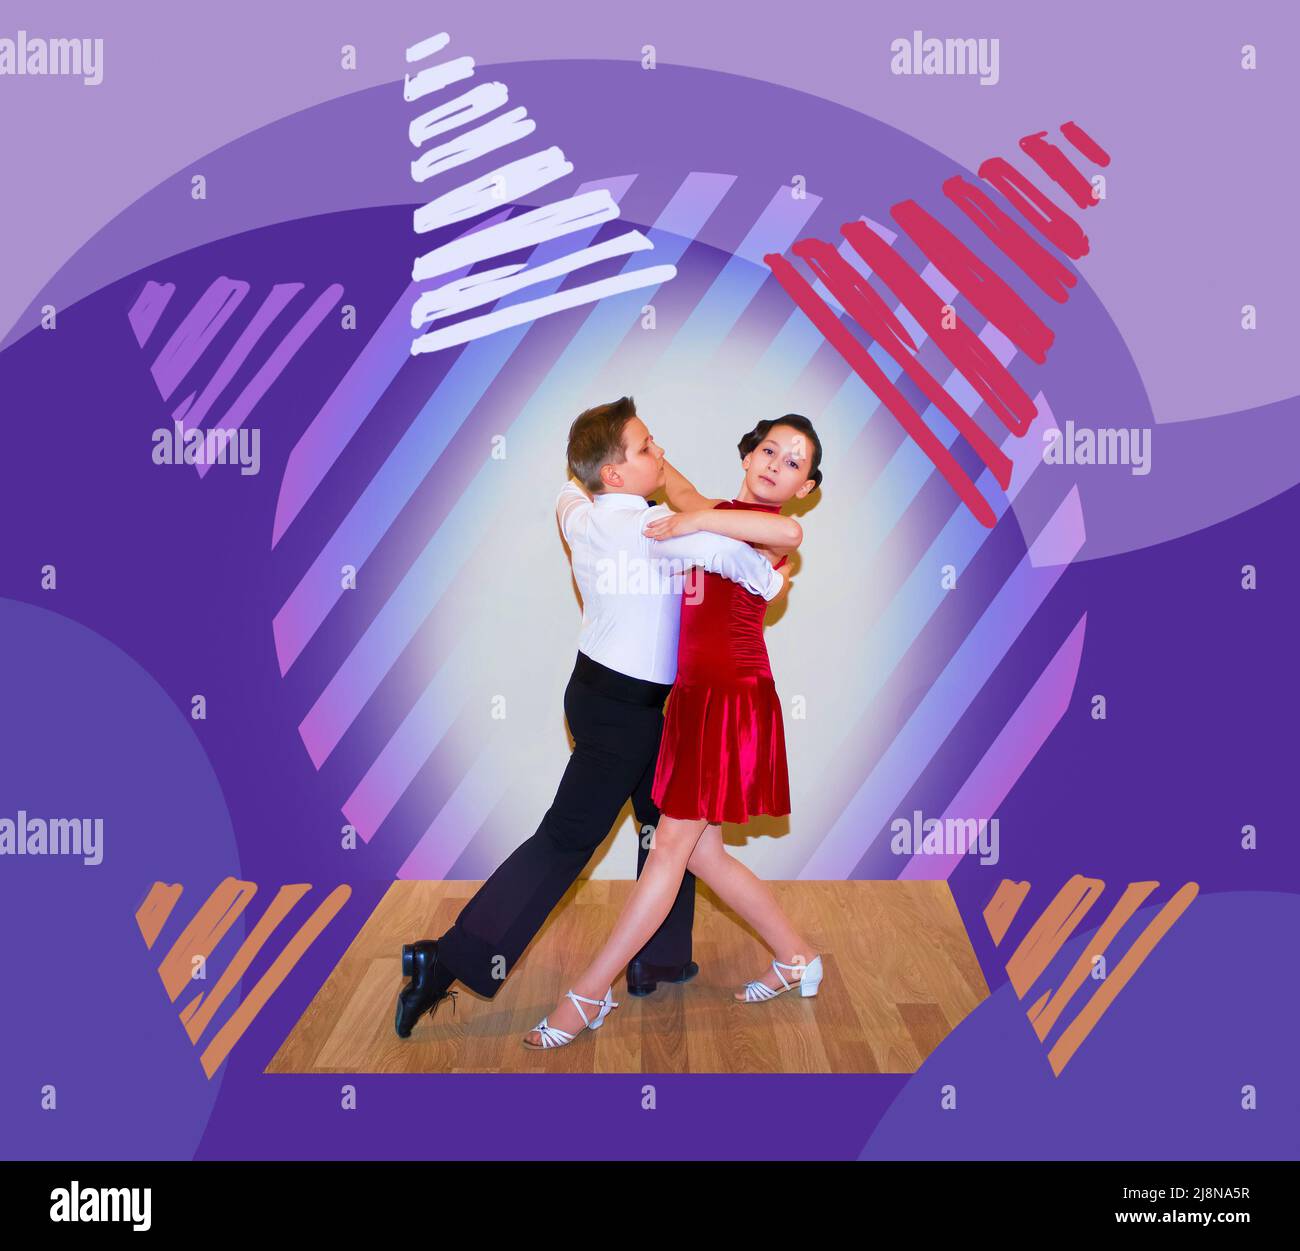 The young boy and girl posing at dance studio on abstract art design. The ballroom dancing concept Stock Photo